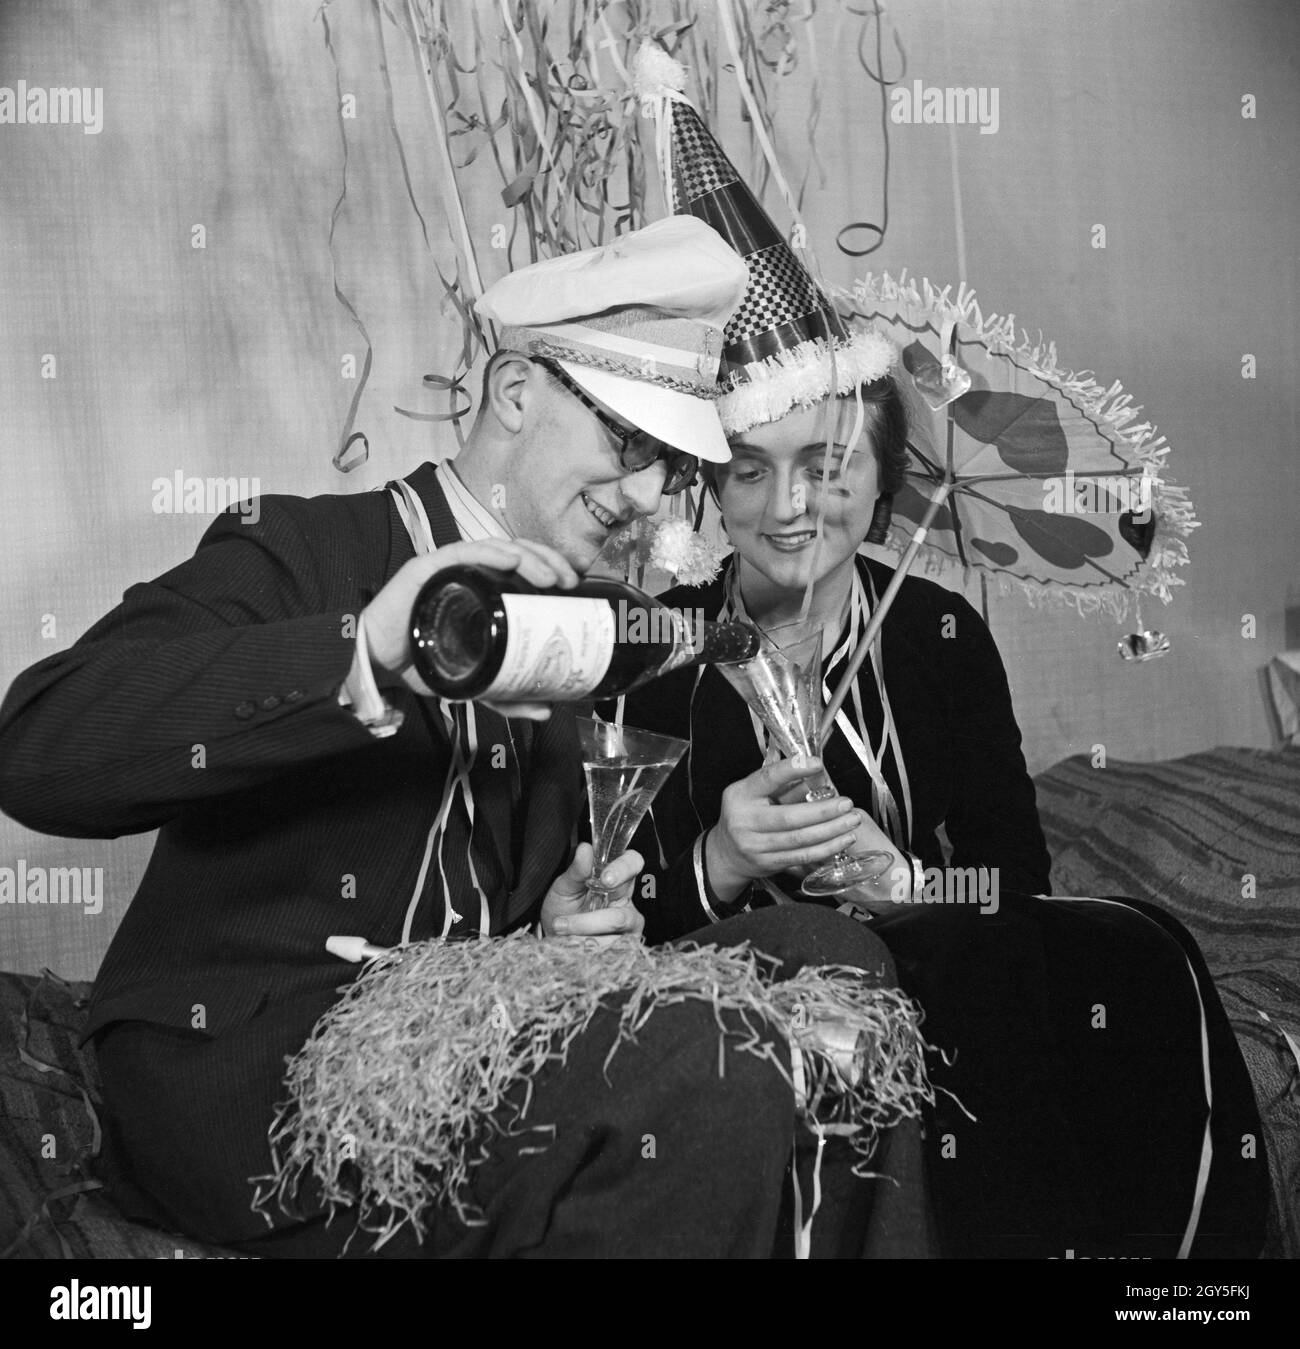 Gäste einer Silvesterparty, Deutsches Reich 1930er Jahre. Guests of a New Year's Eve party, Germany 1930s. Stock Photo